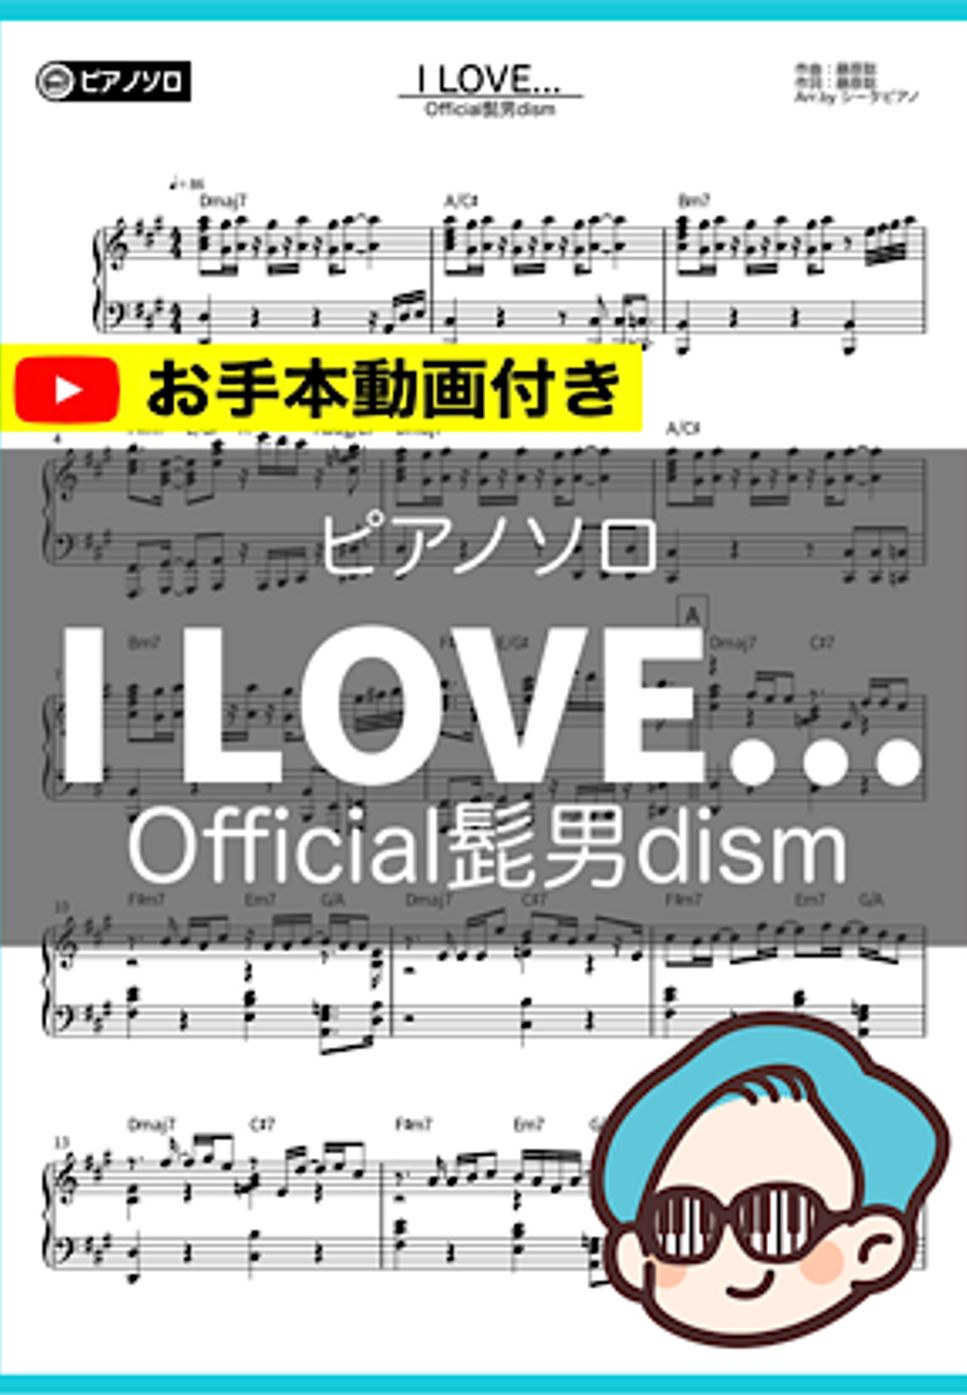 Official髭男dism - I LOVE... by THETA